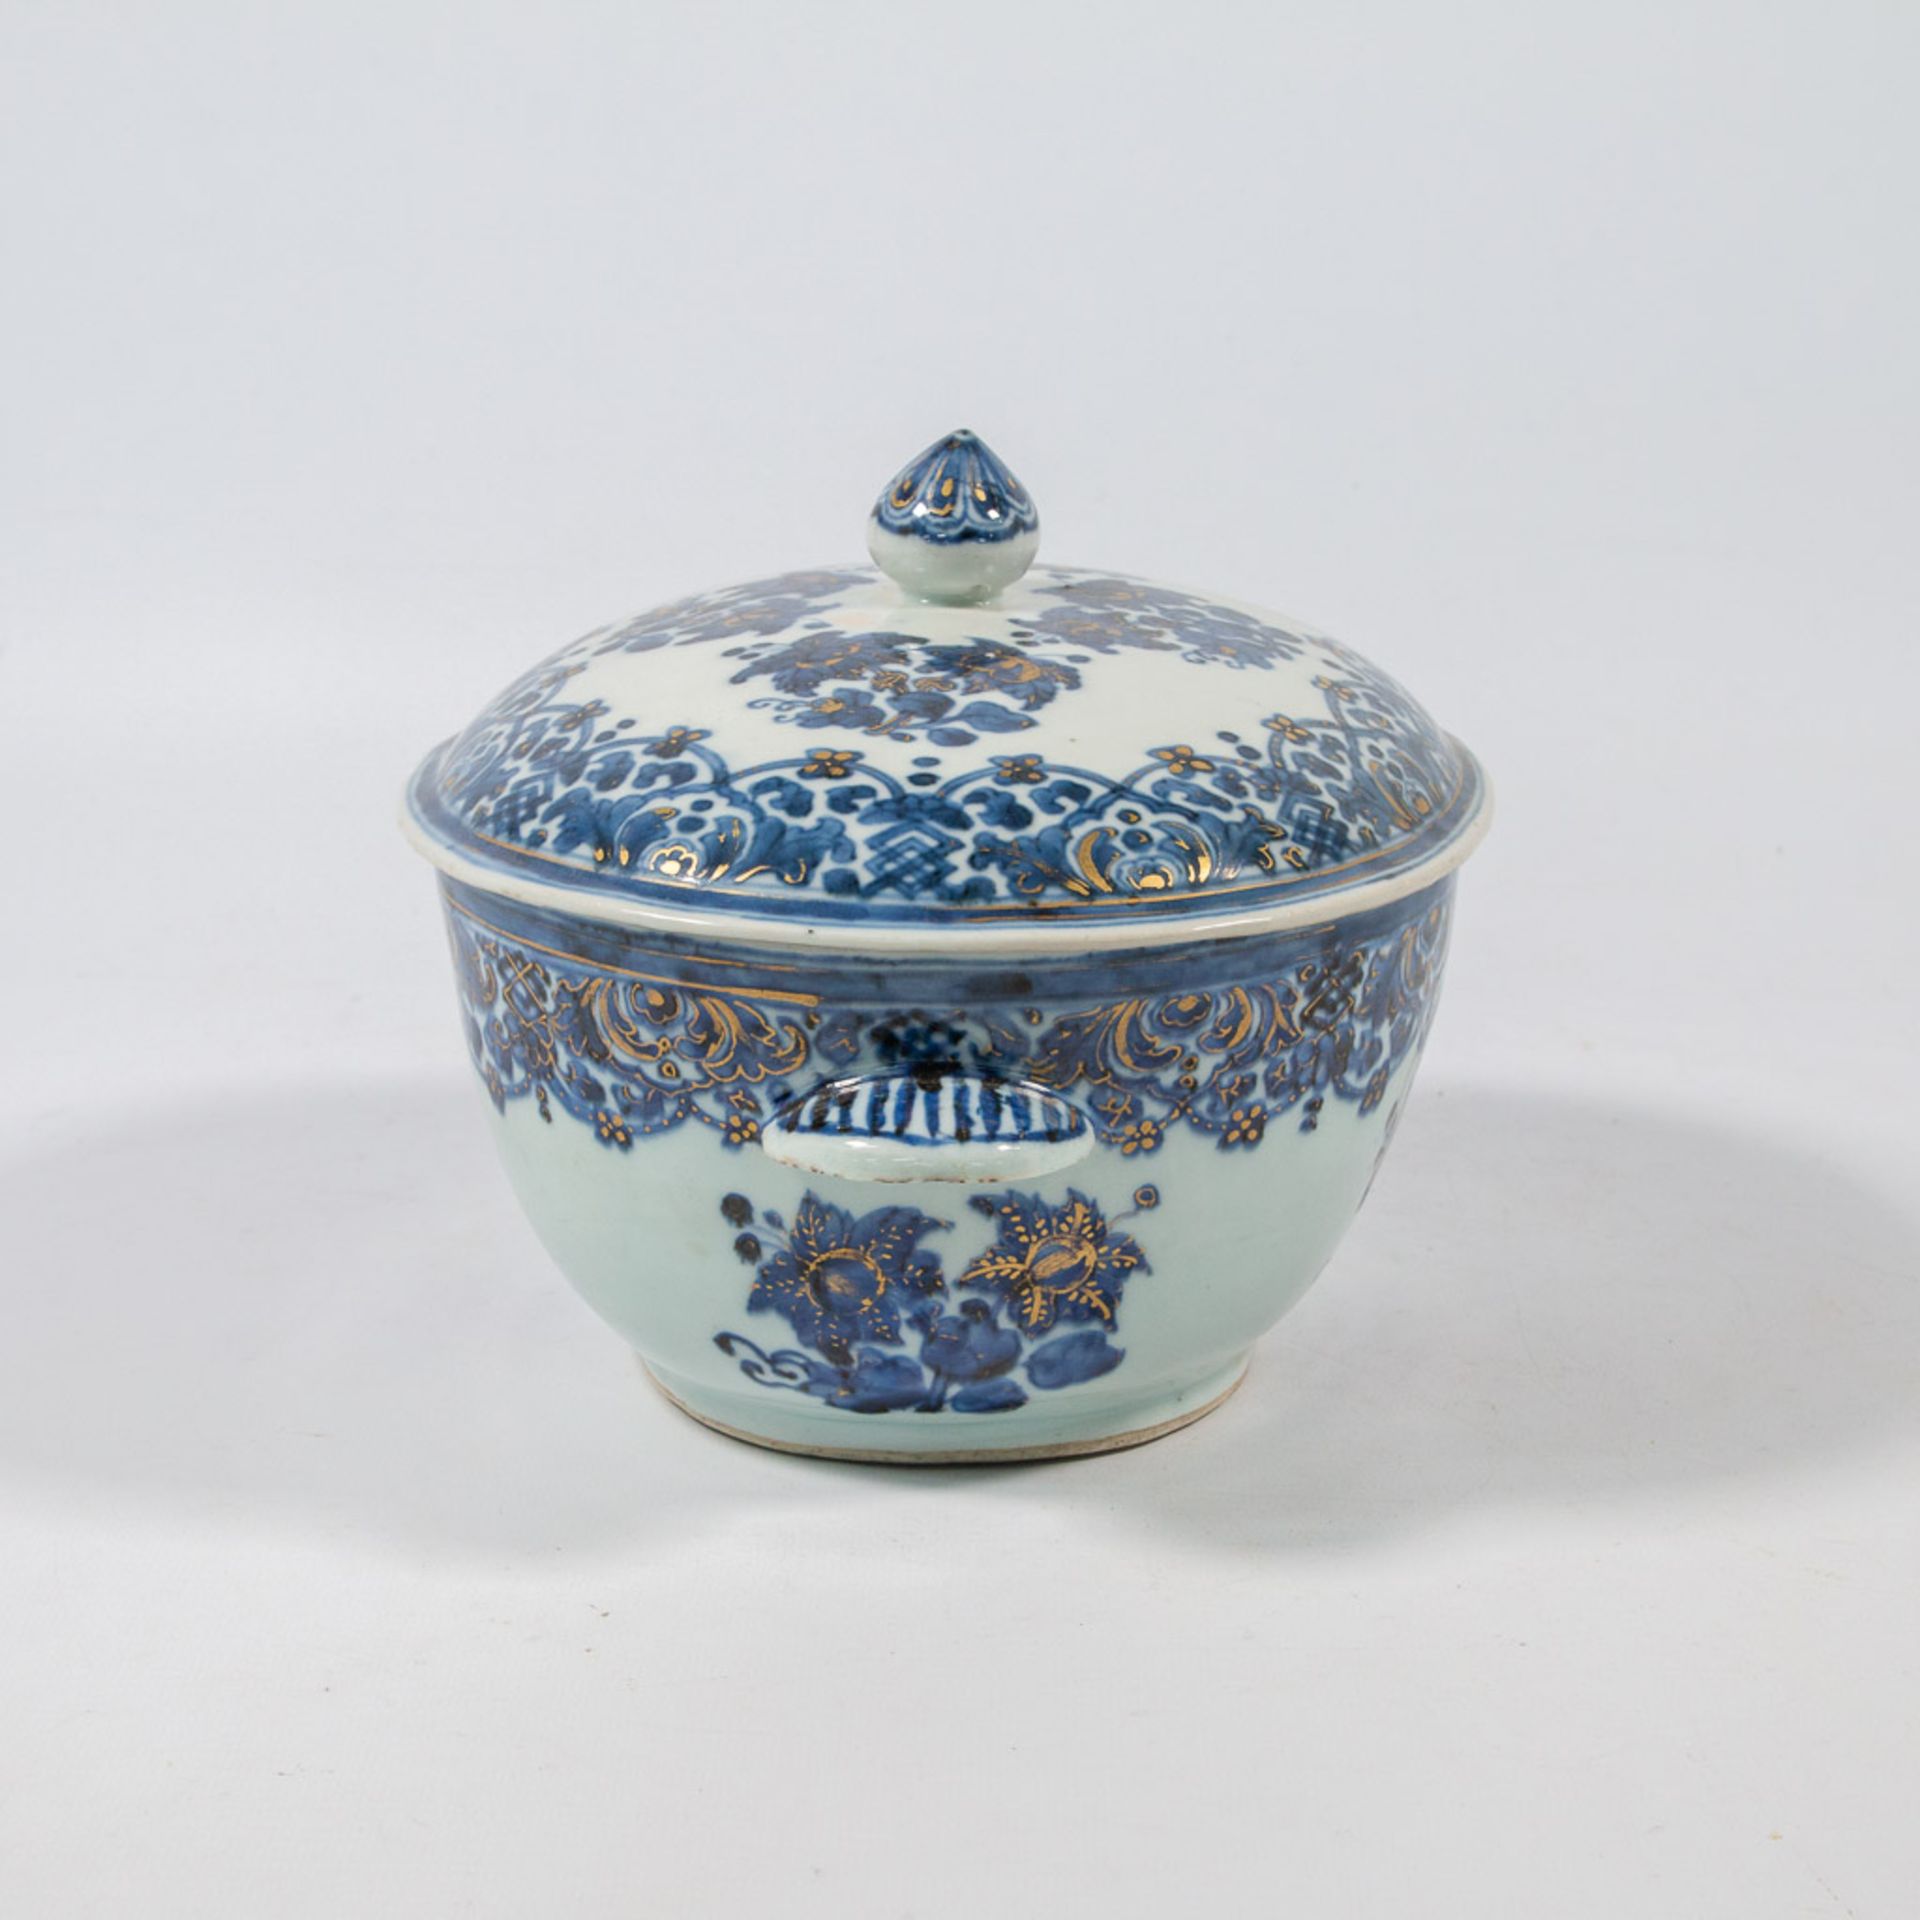 A small tureen with lid, Chinese export porcelain with underglaze blue, white and overglaze gold flo - Image 7 of 24